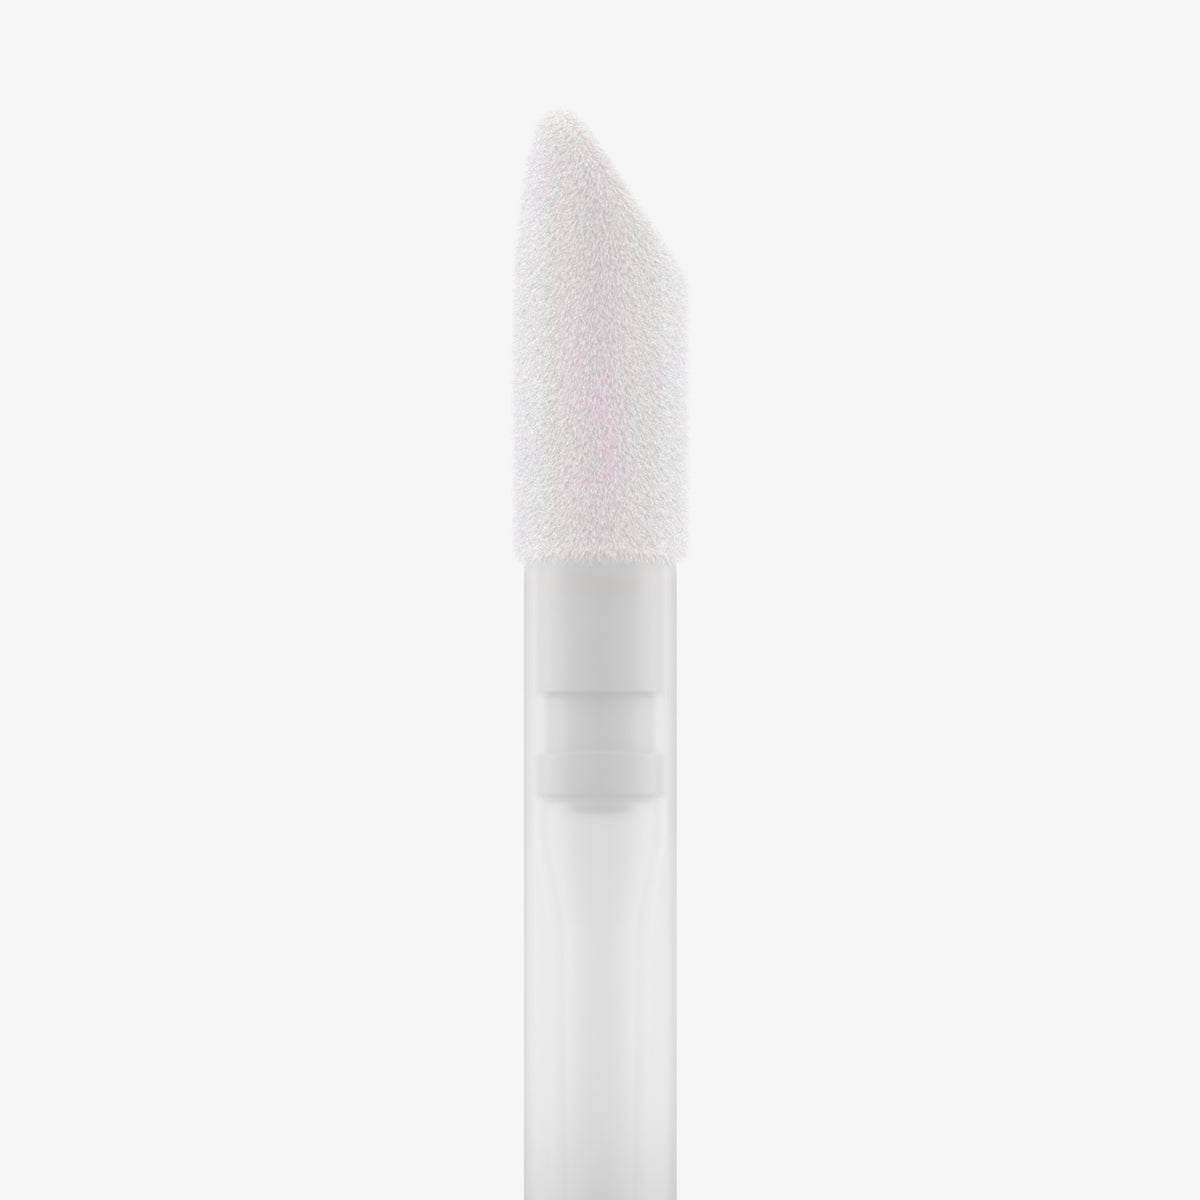 Catrice Cosmetics | Plump It Up Lip Booster Poppin' Champagne